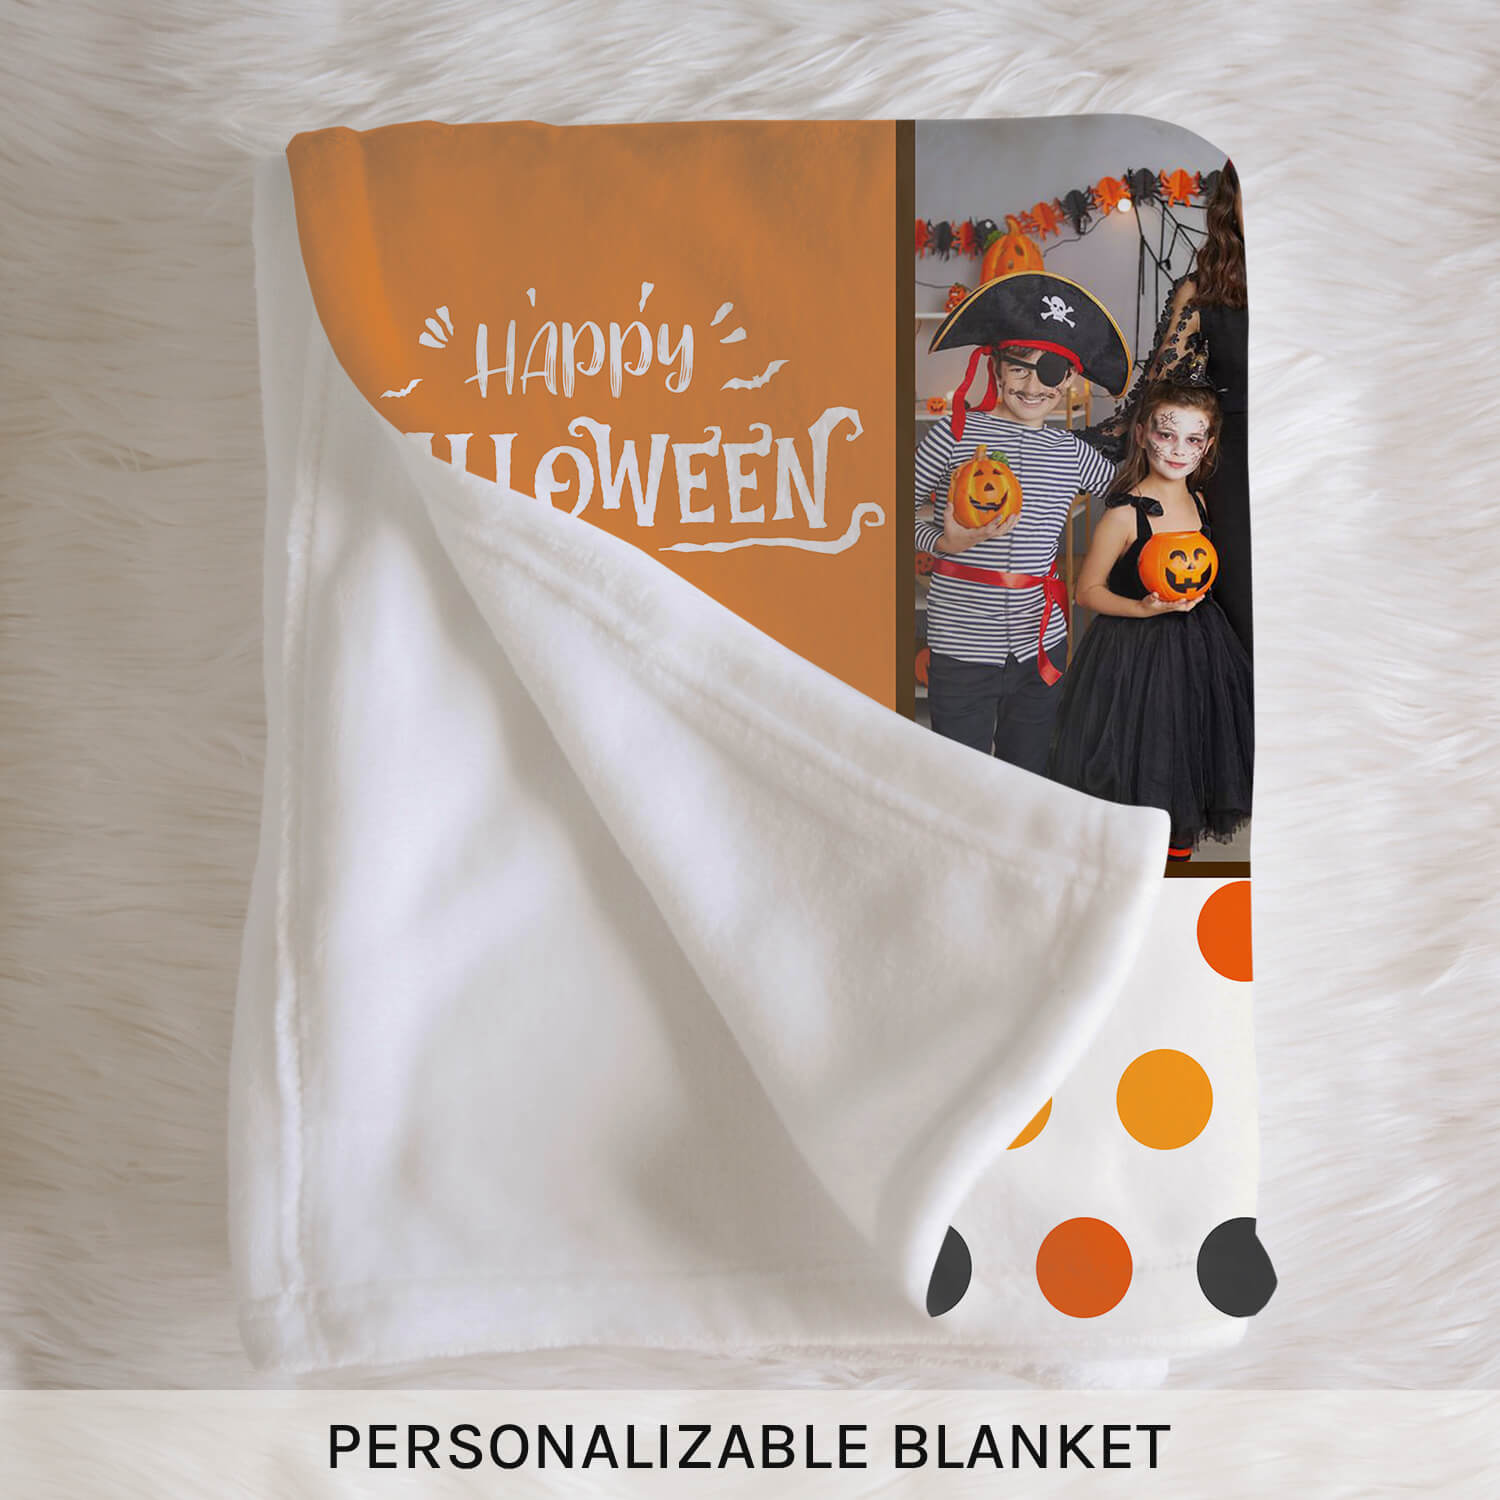 I Teach The Cutest Pumpkins In The Patch - Personalized Halloween gift for Teacher - Custom Blanket - MyMindfulGifts